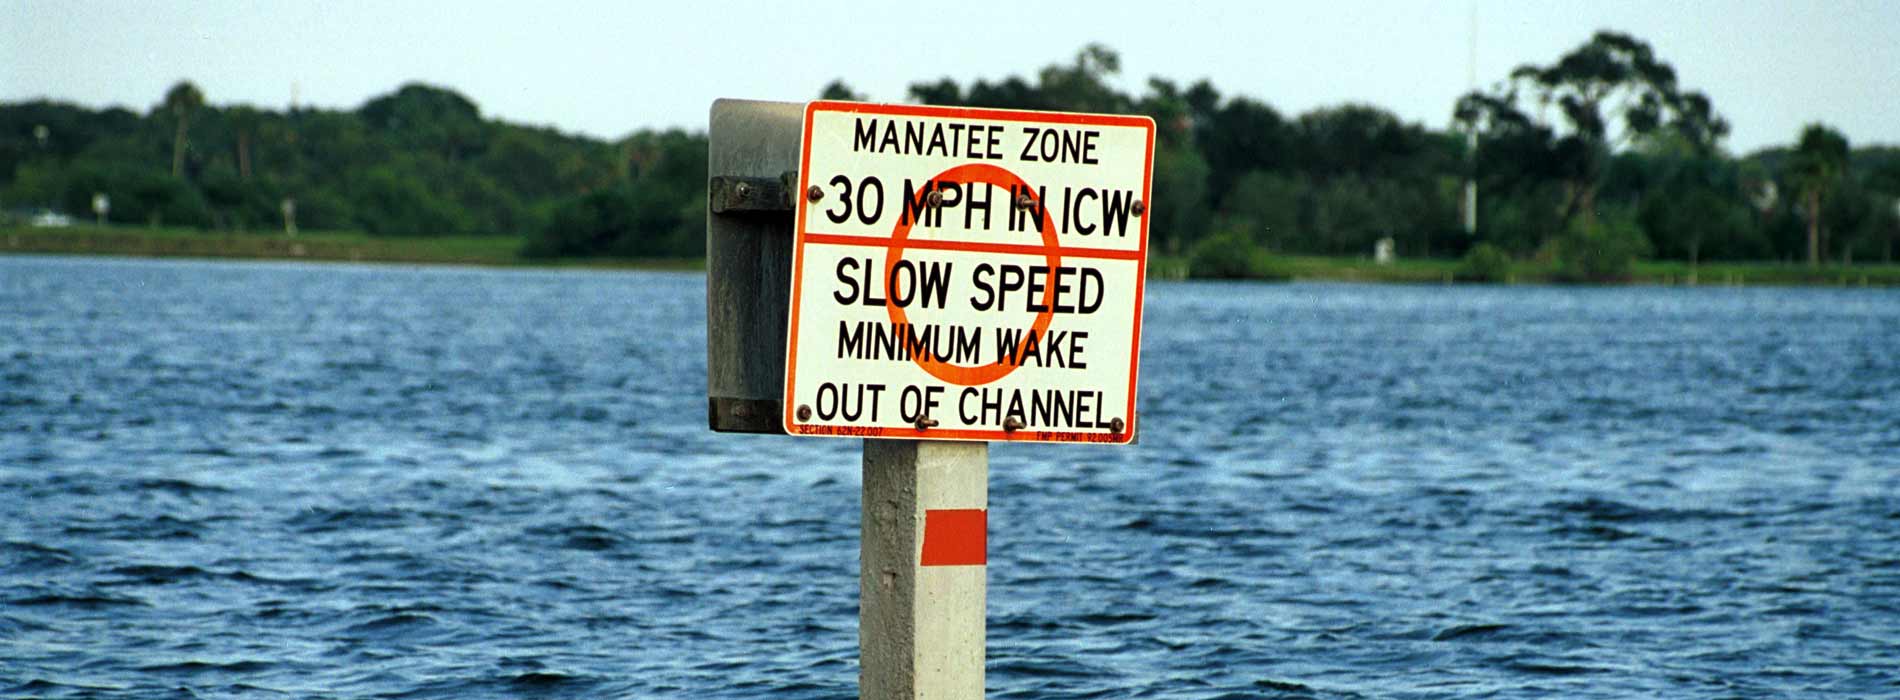 Slow for manatees sign